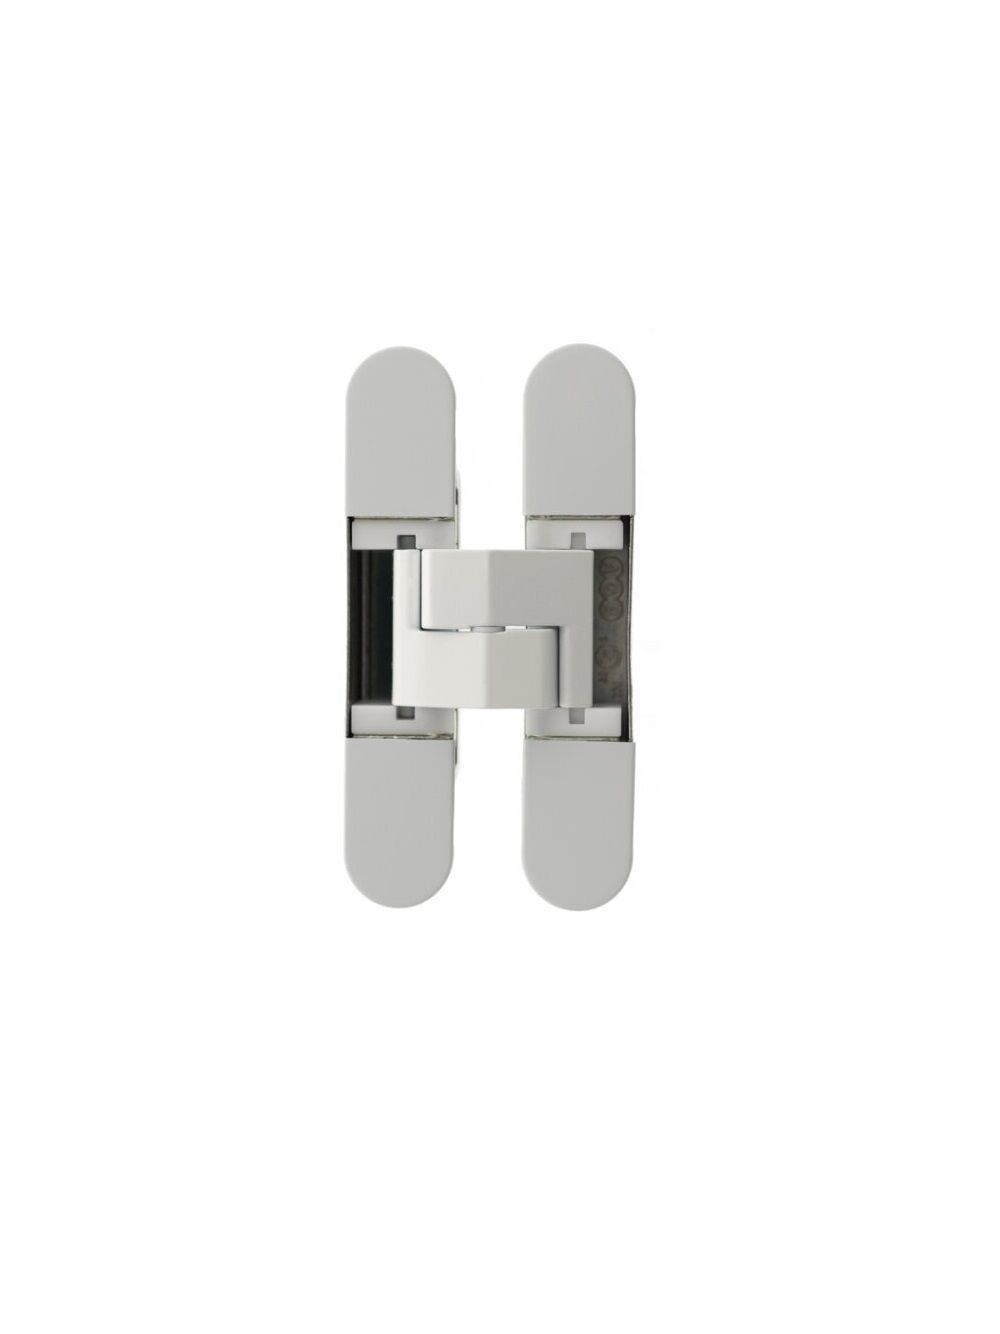 Atlantic AGB Eclipse Fire Rated Adjustable Concealed Hinge - White